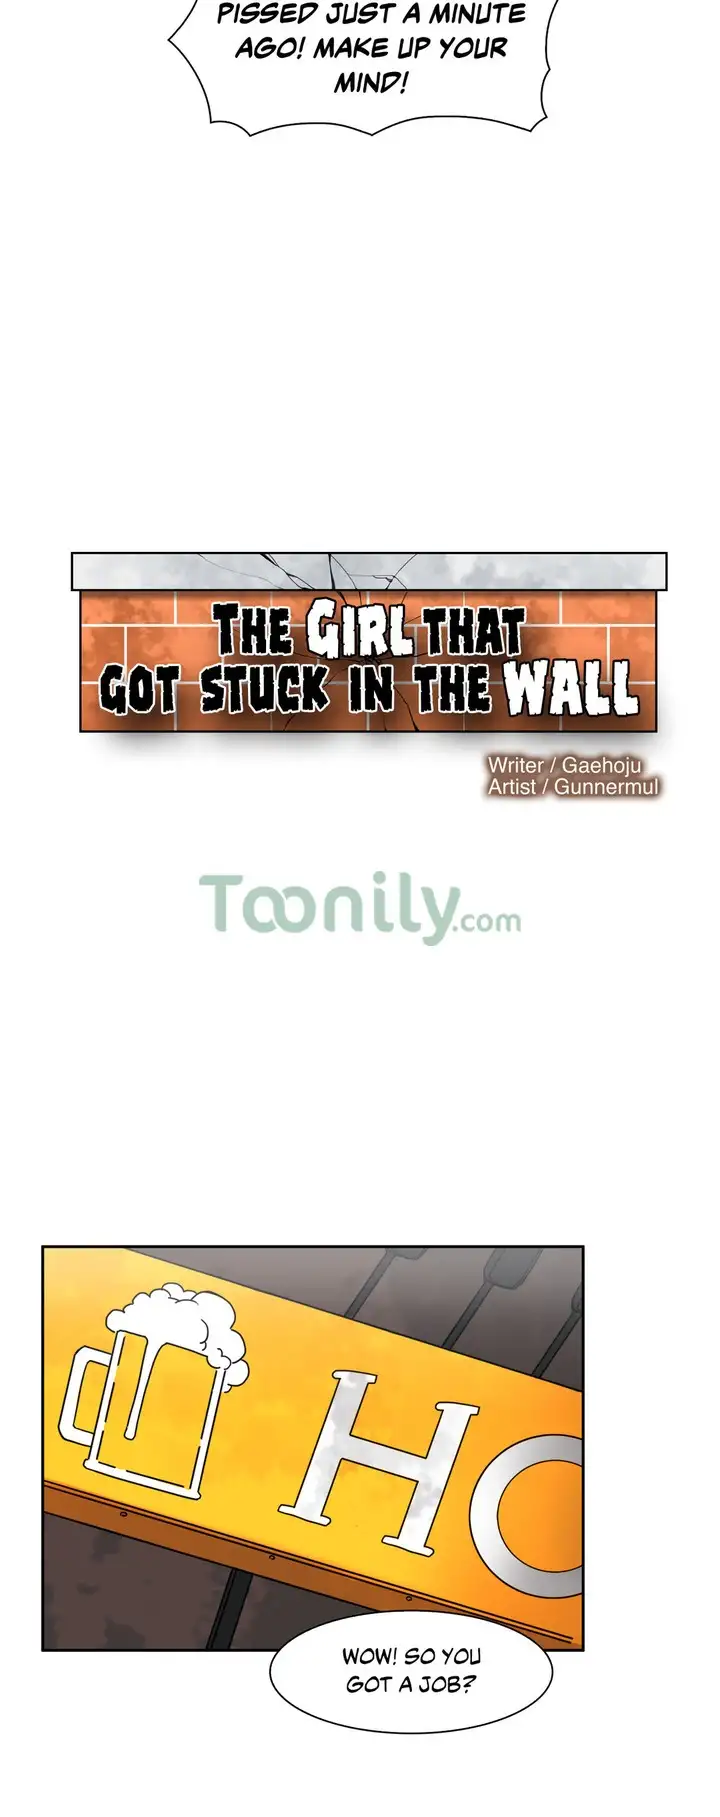 The Girl That Got Stuck in the Wall image